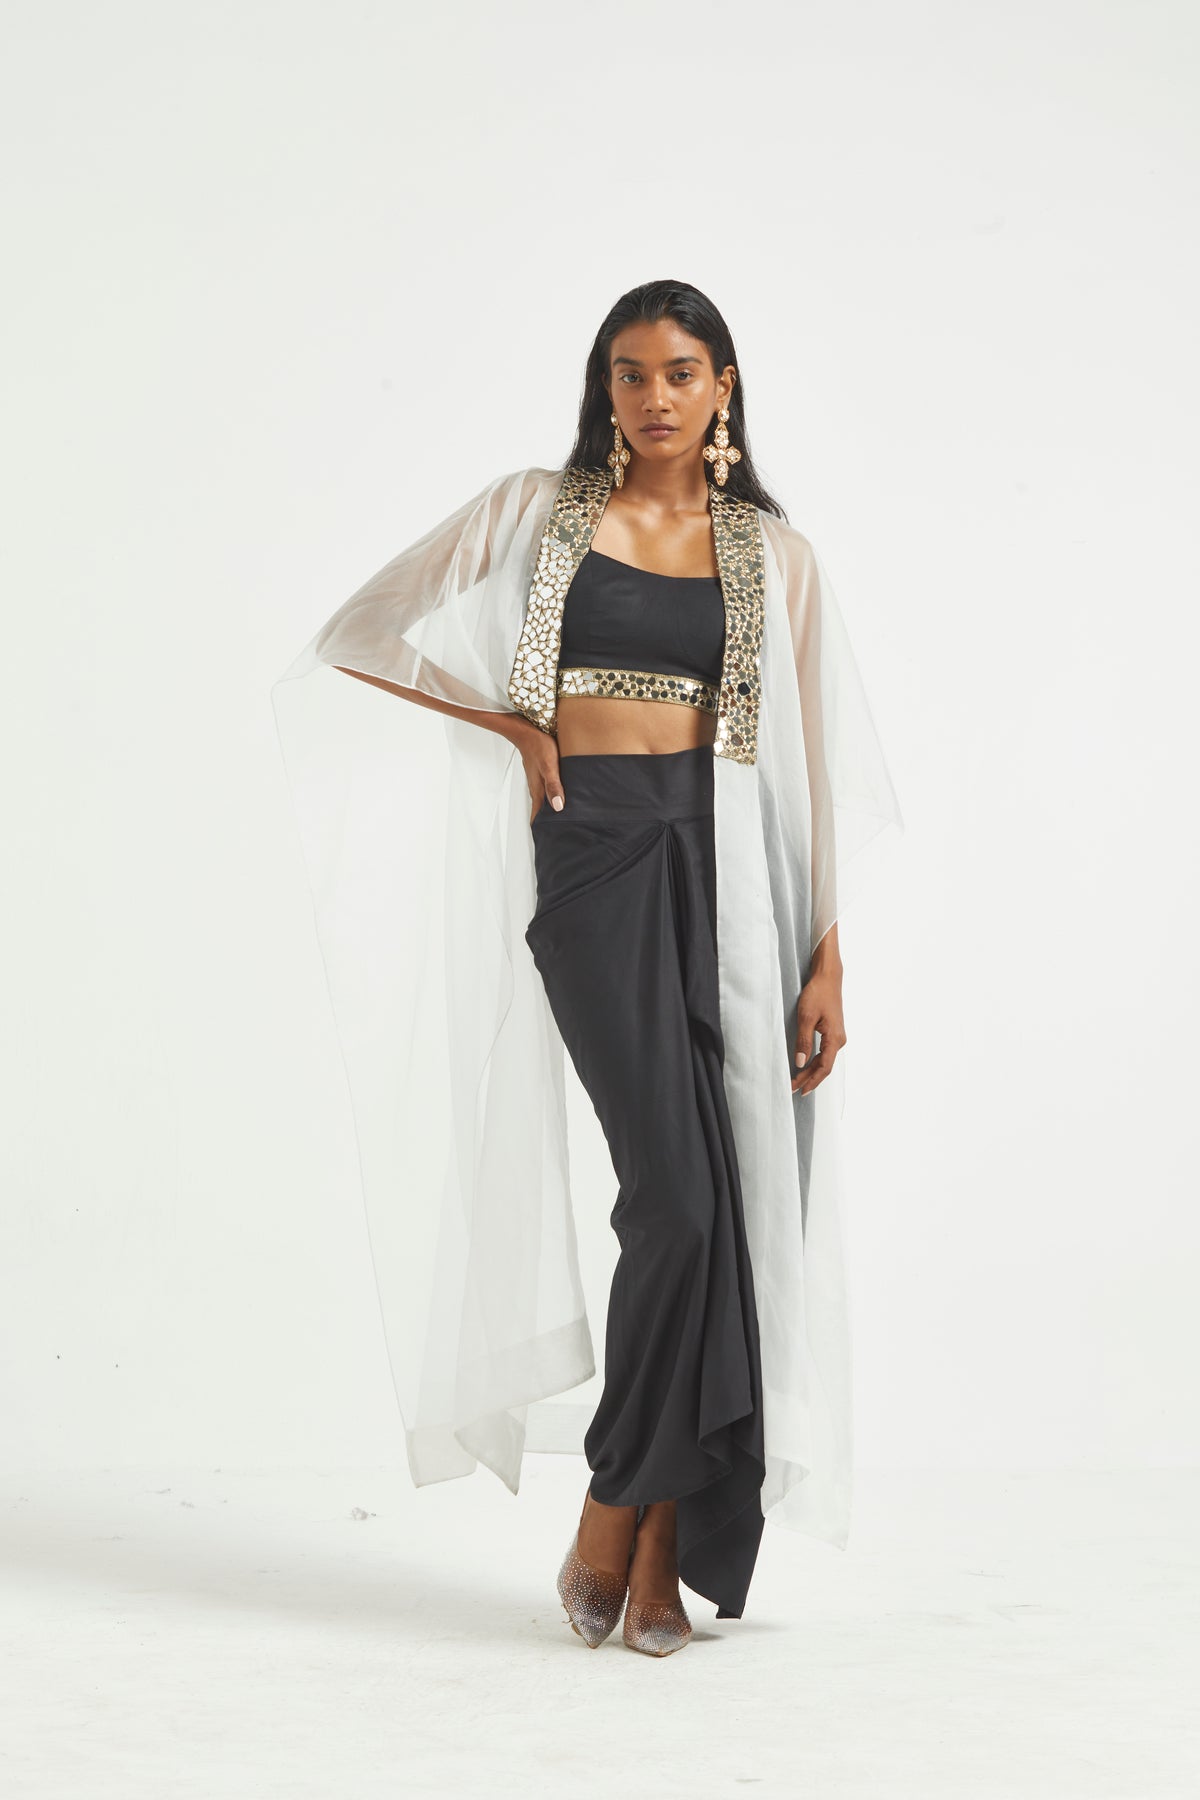 dash and dot - Mirror Bralette and Draped Skirt Set